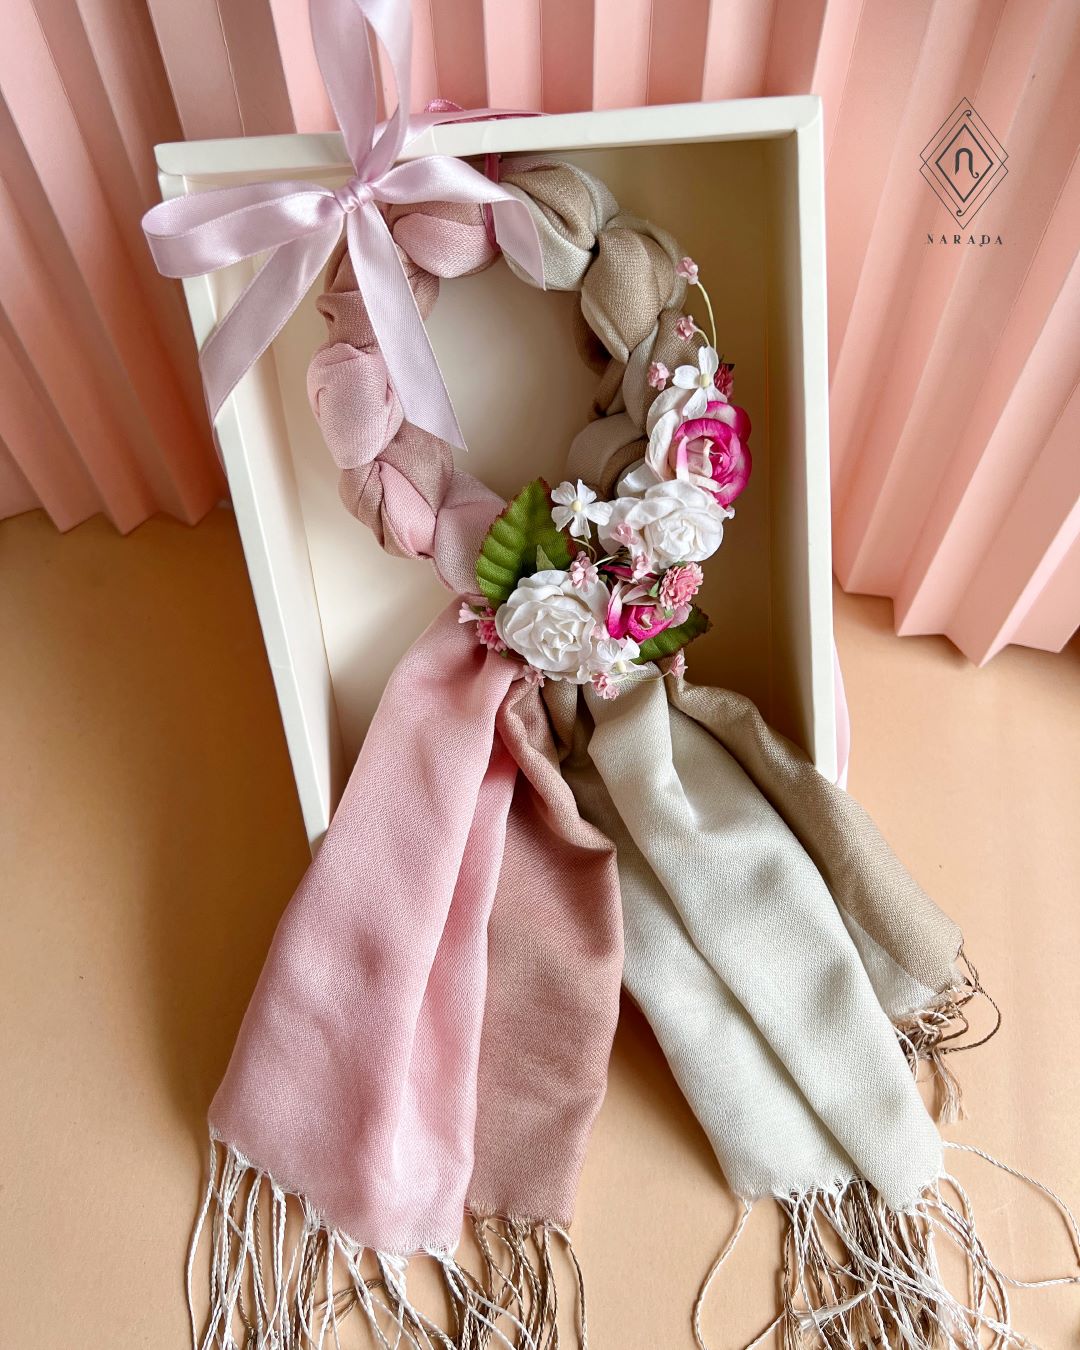 MN15 Scarf Garland Mother day GIft